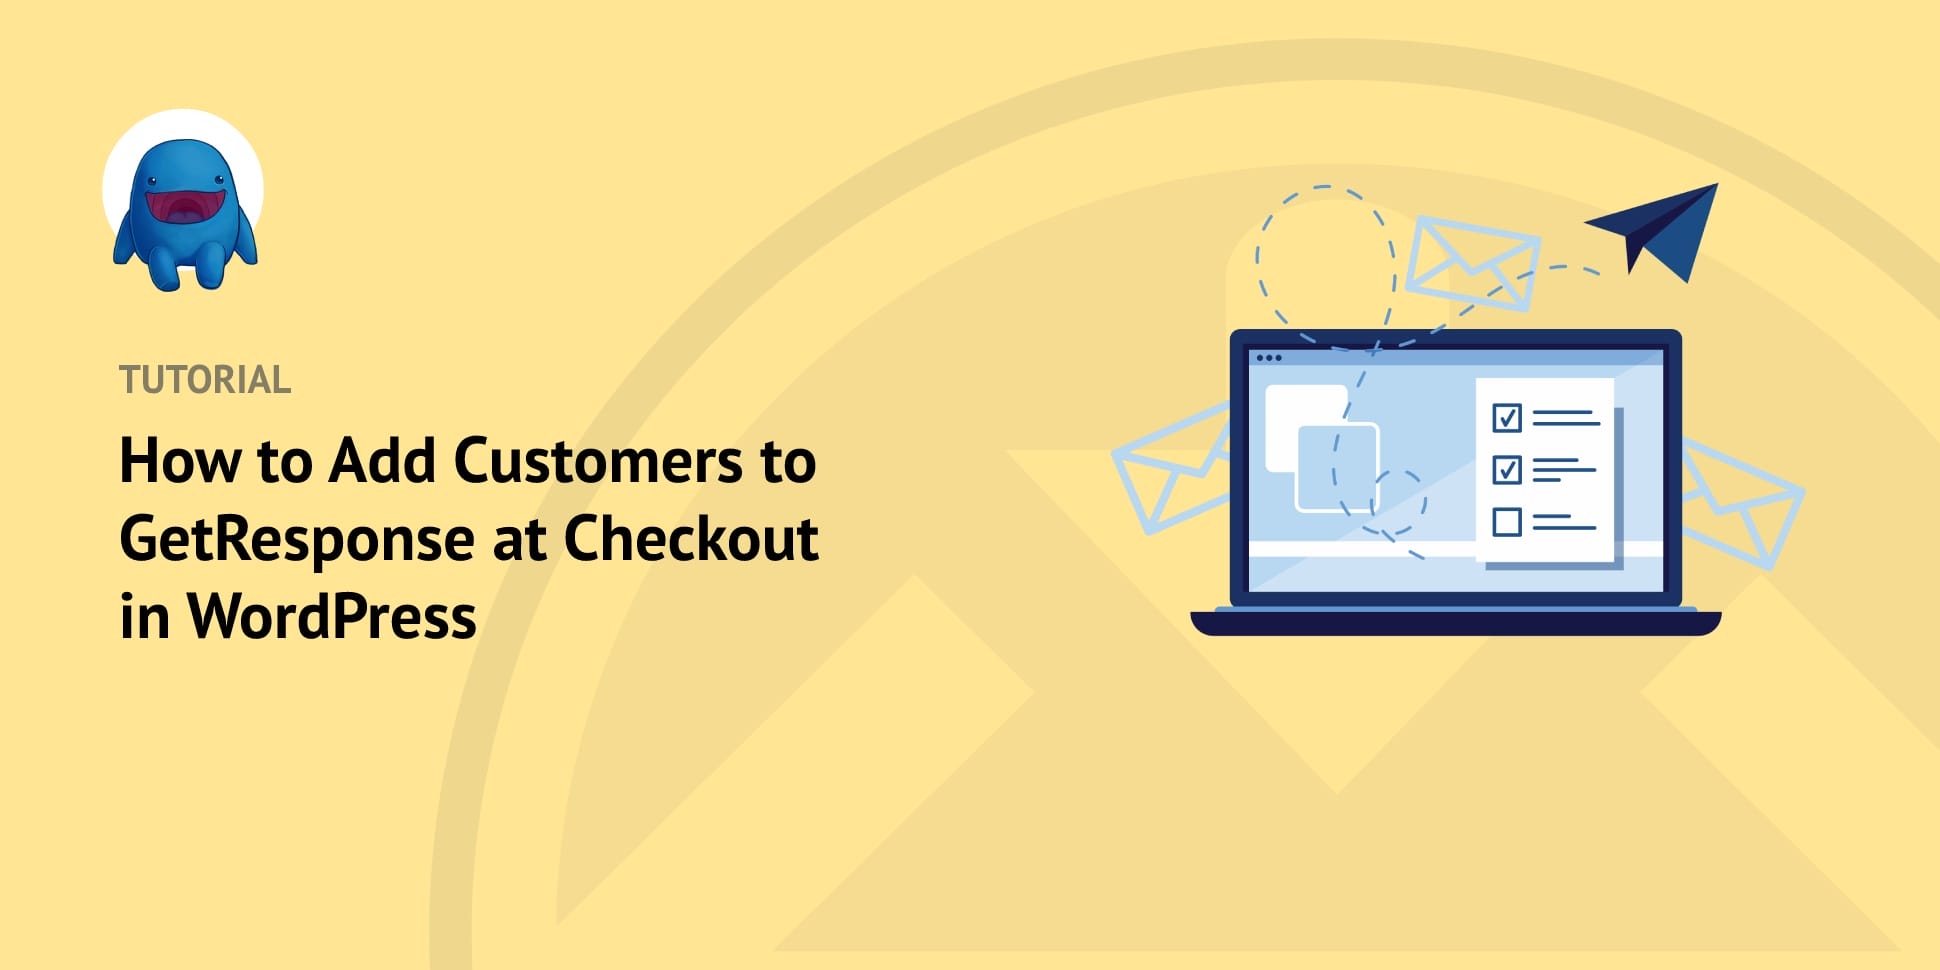 How to Add Customers to GetResponse During Checkout in WordPress